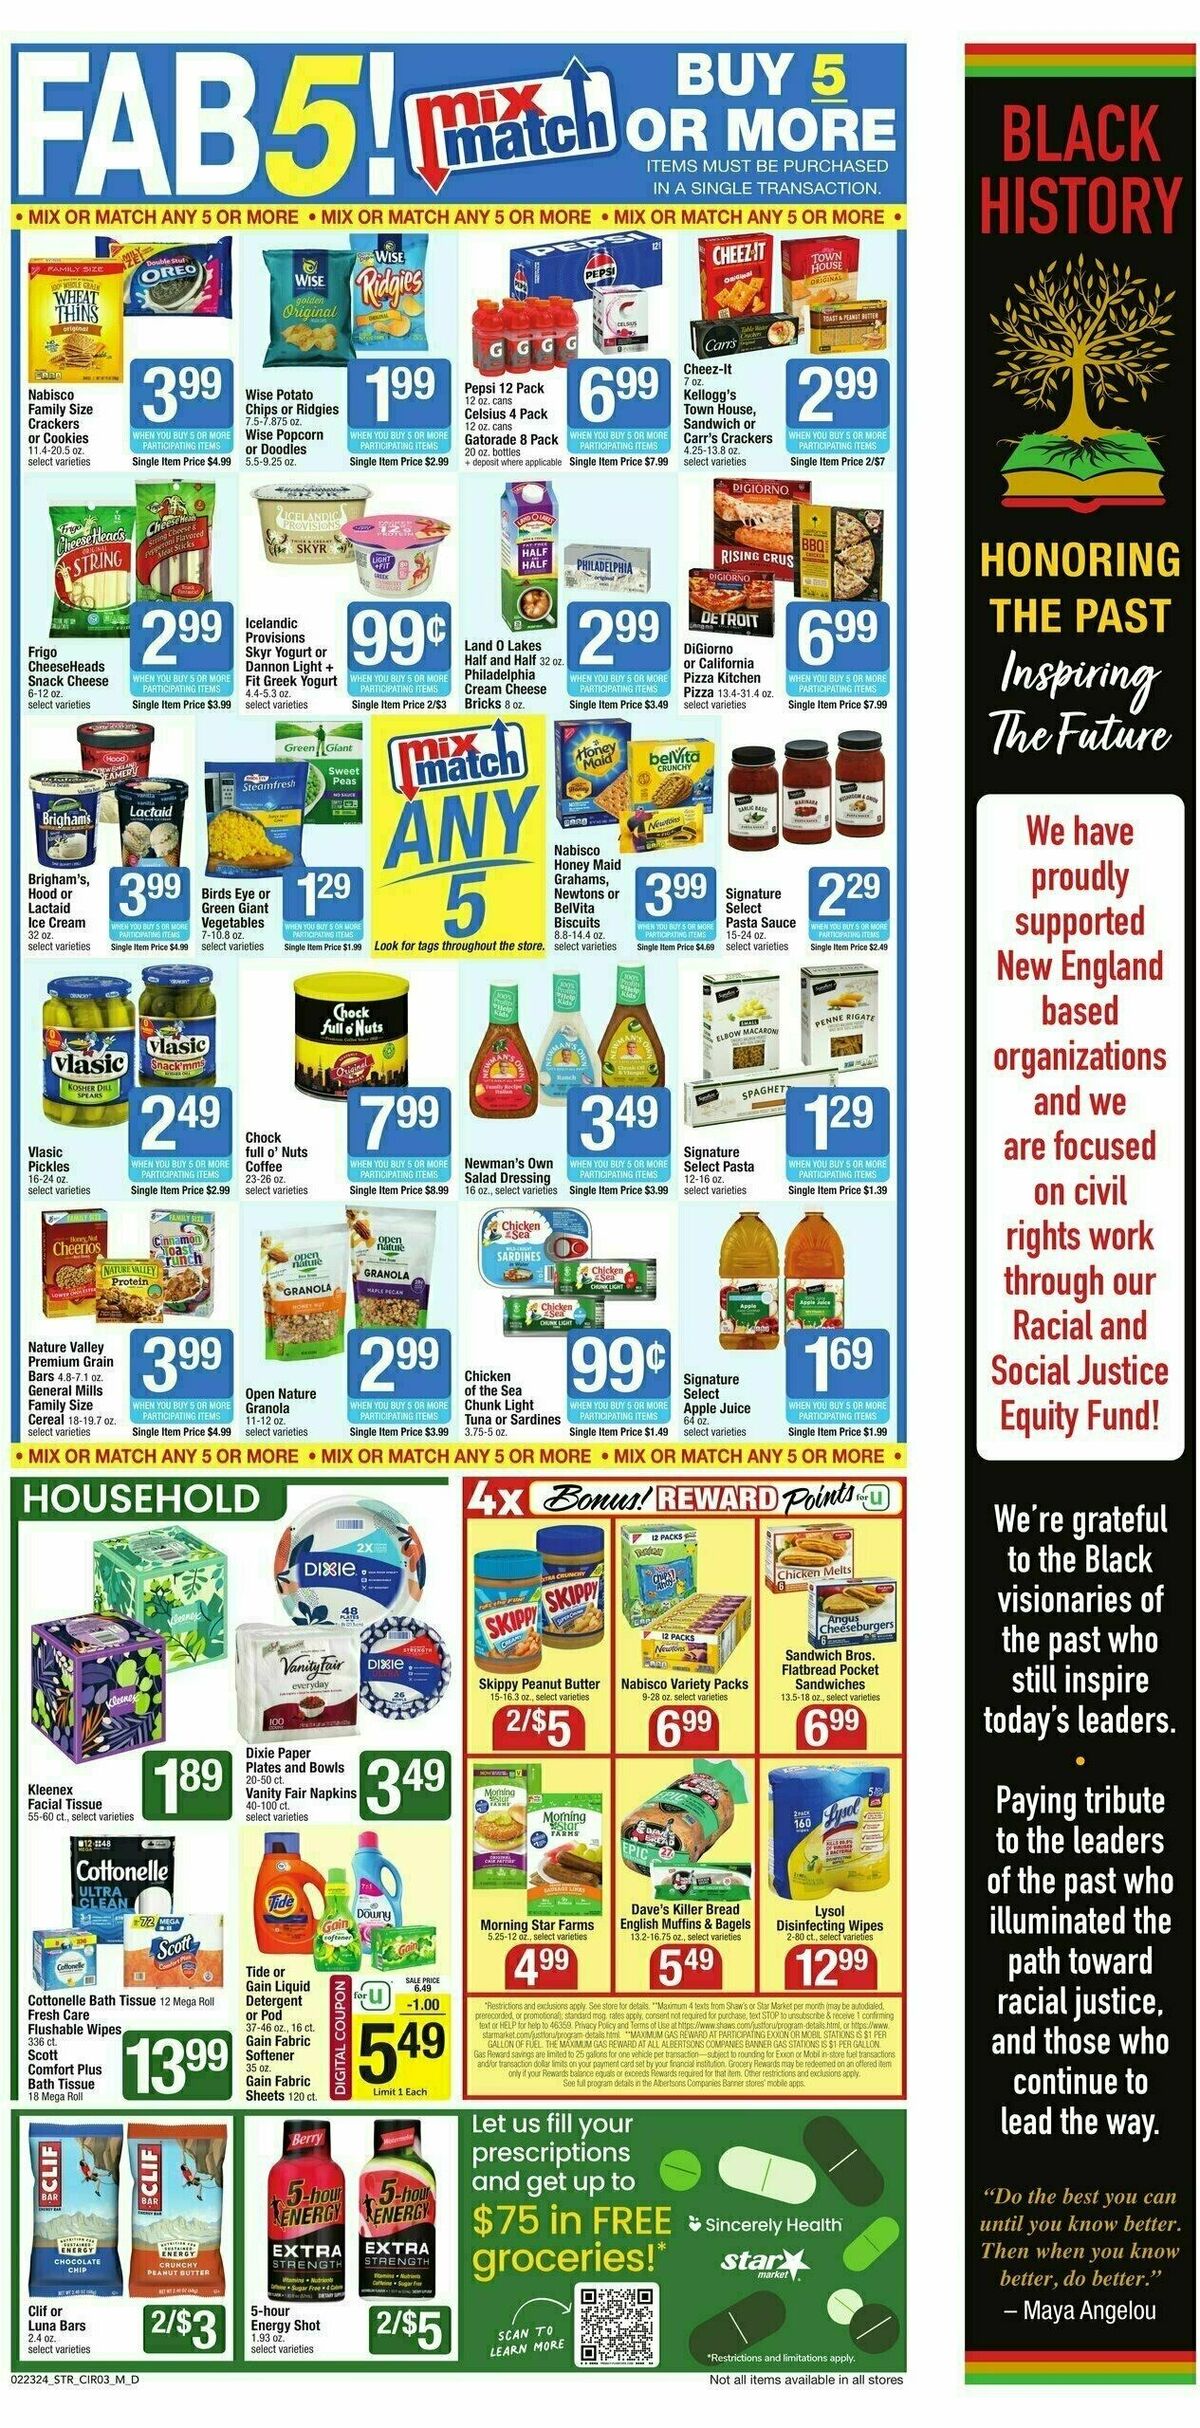 Star Market Weekly Ad from February 23